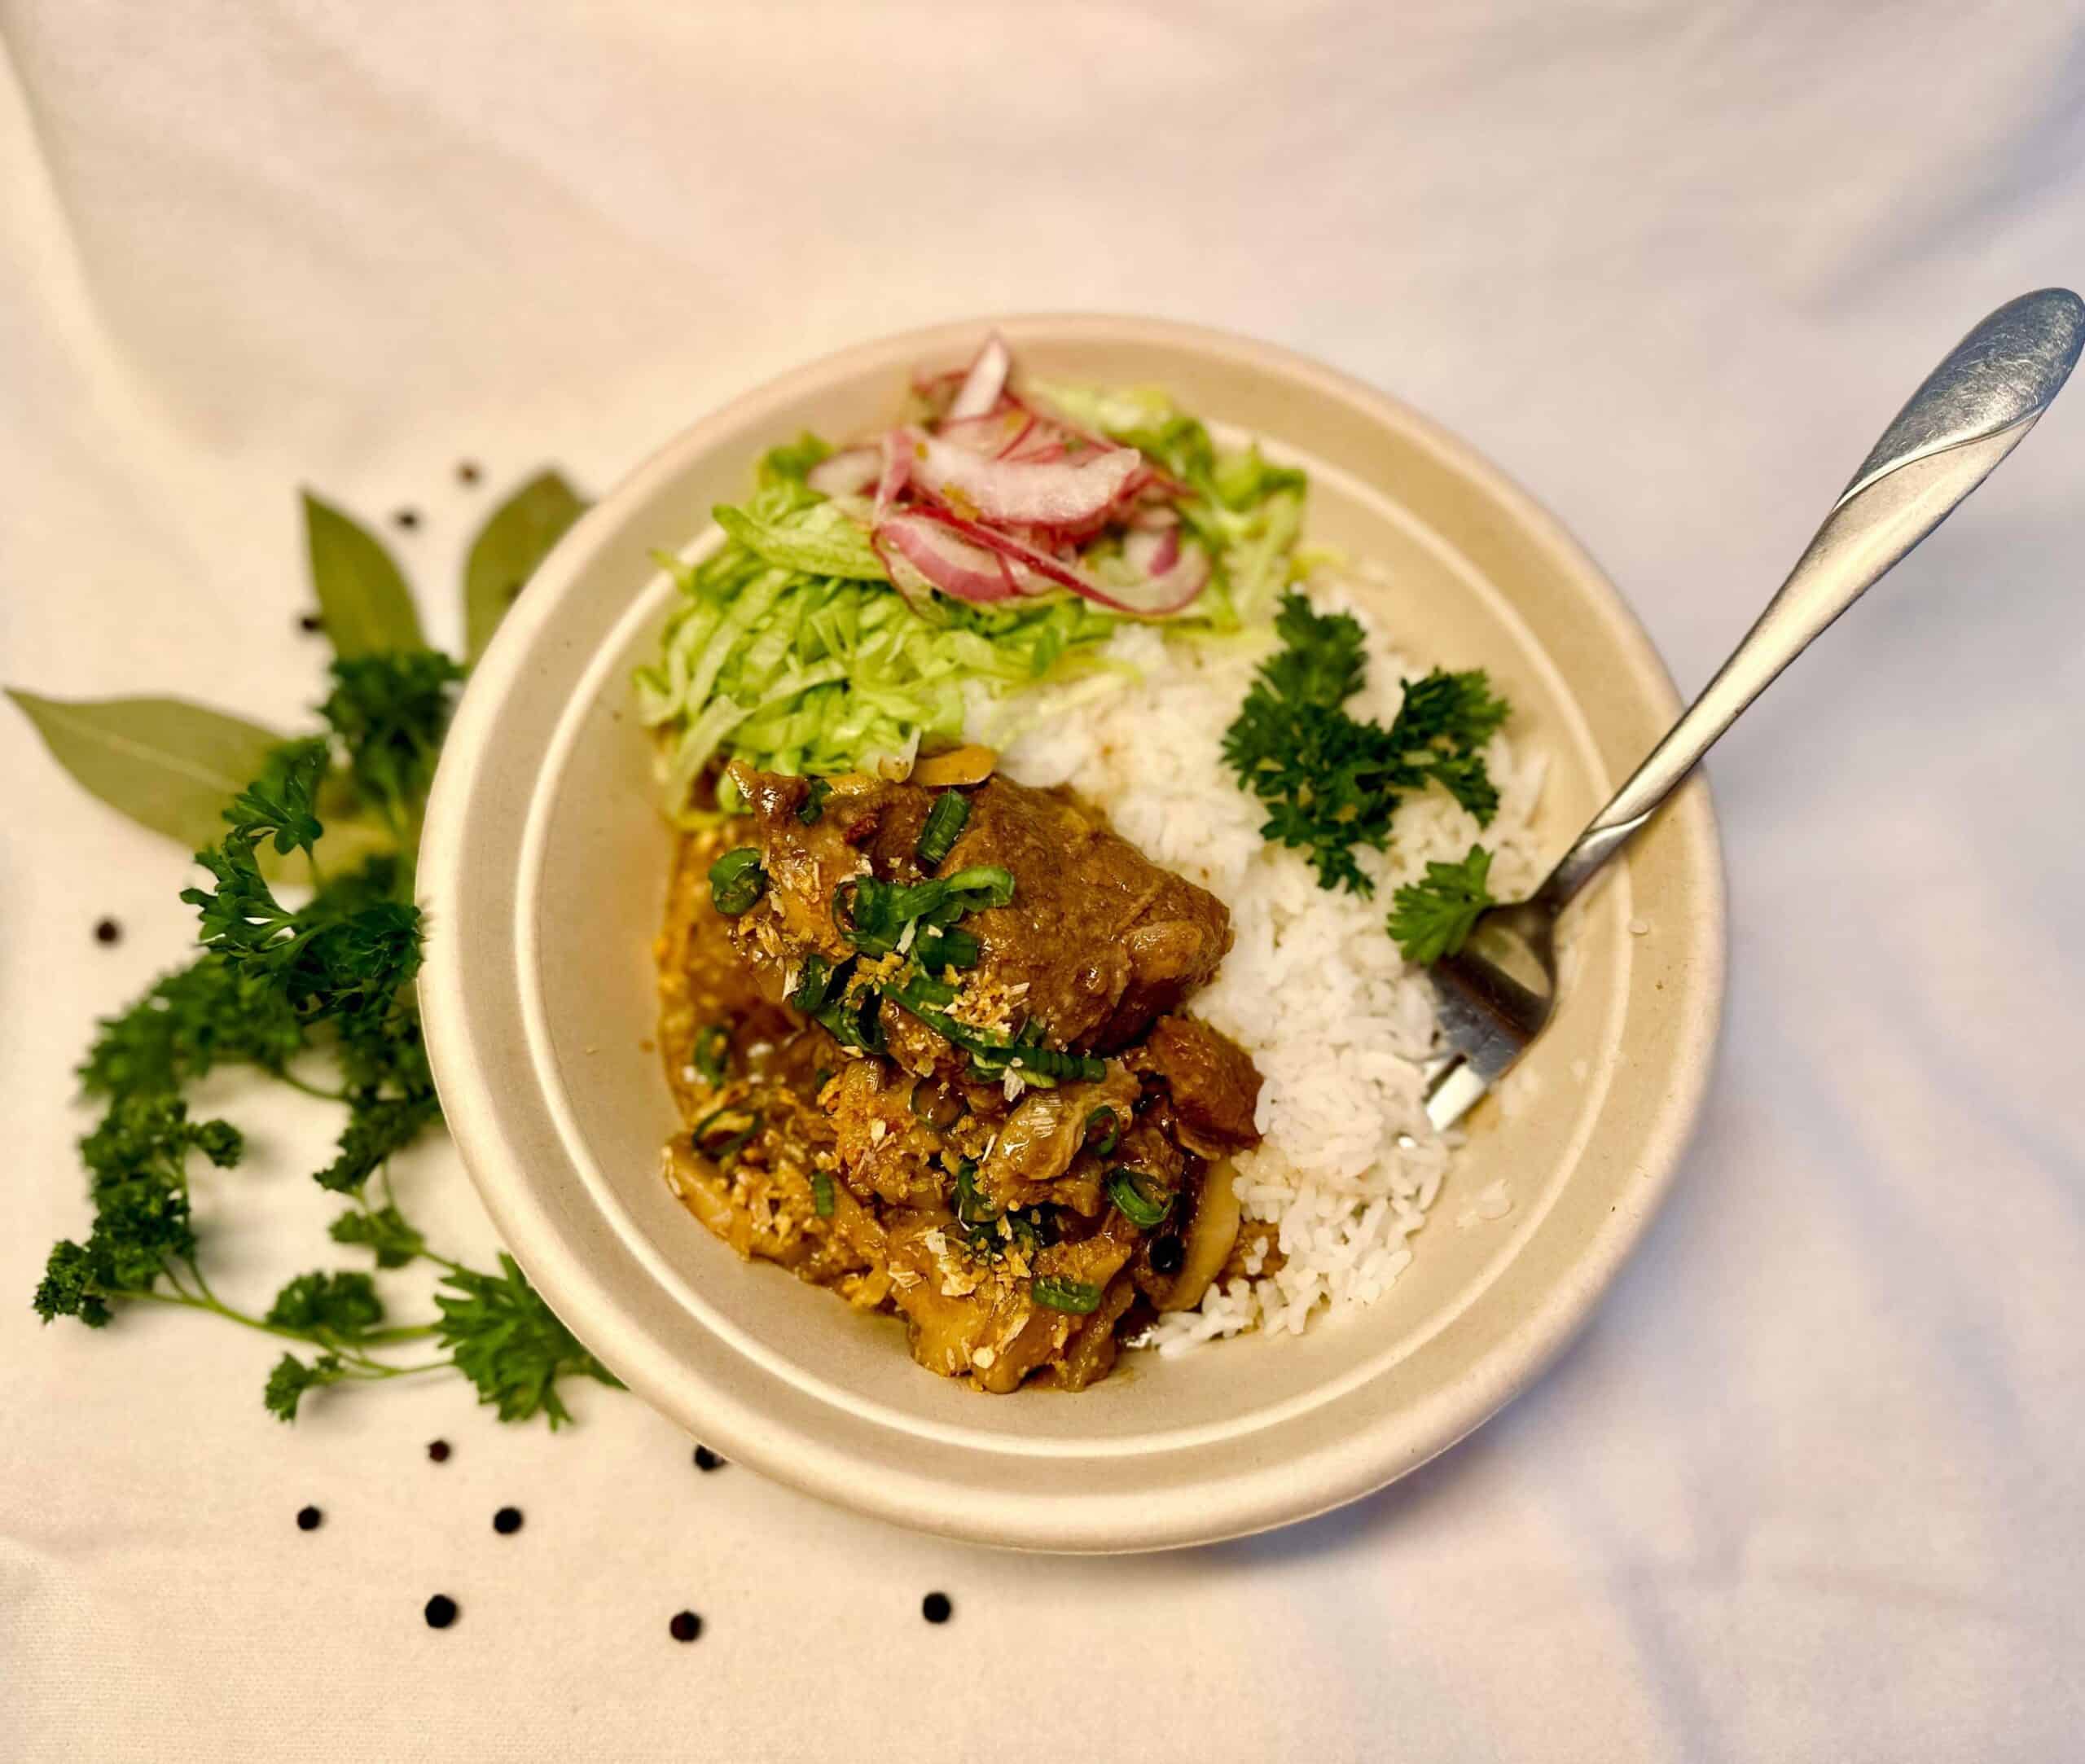 bowl of braised beef over rice with a side of greens and radishes